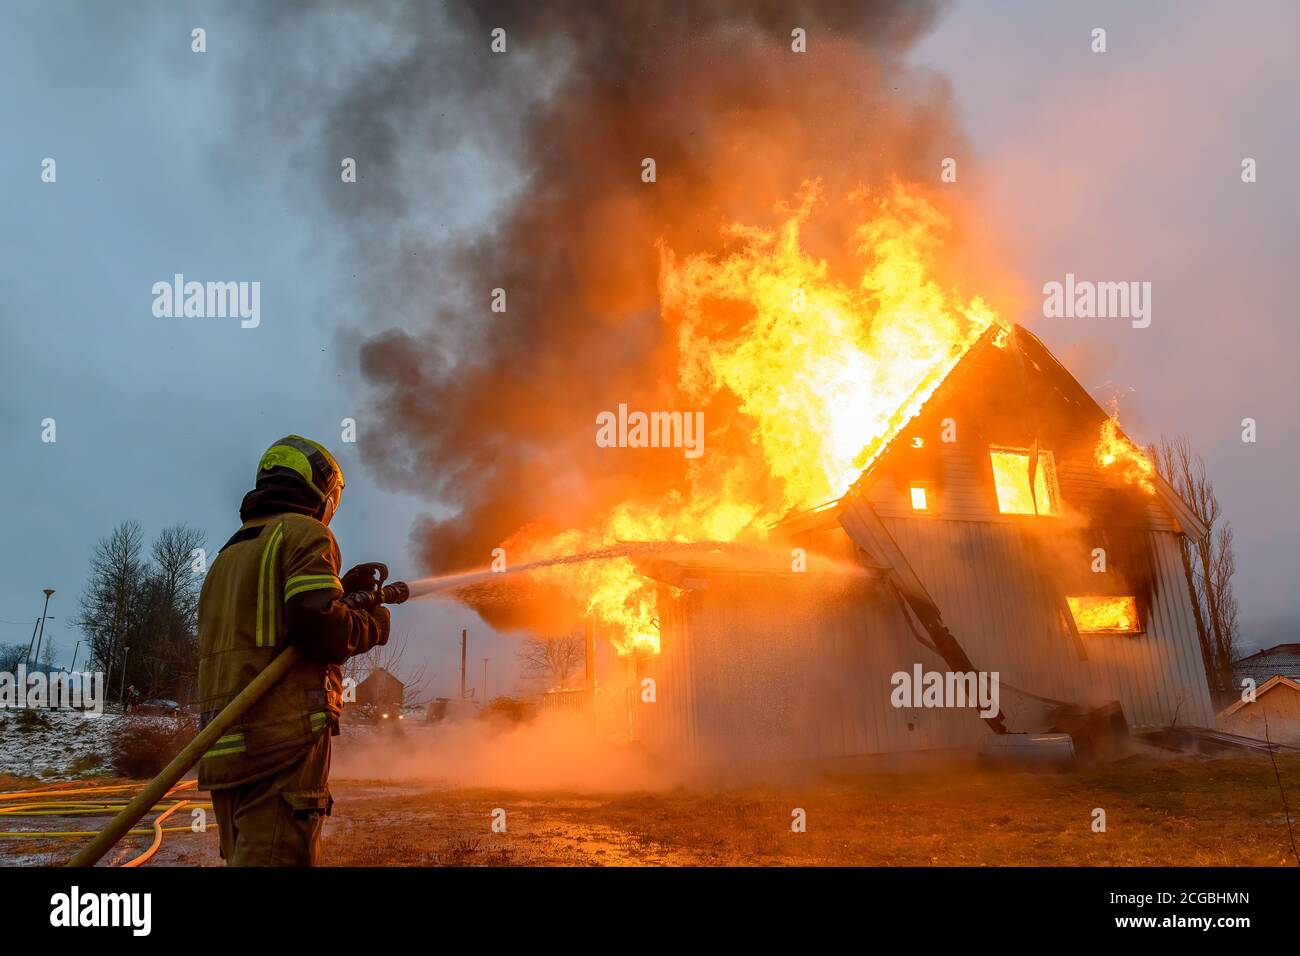 Norwegian first responder firefighter from behind trying to put out flames on house on fire with huge flames and smoke, in winter with snow. Stock Photo